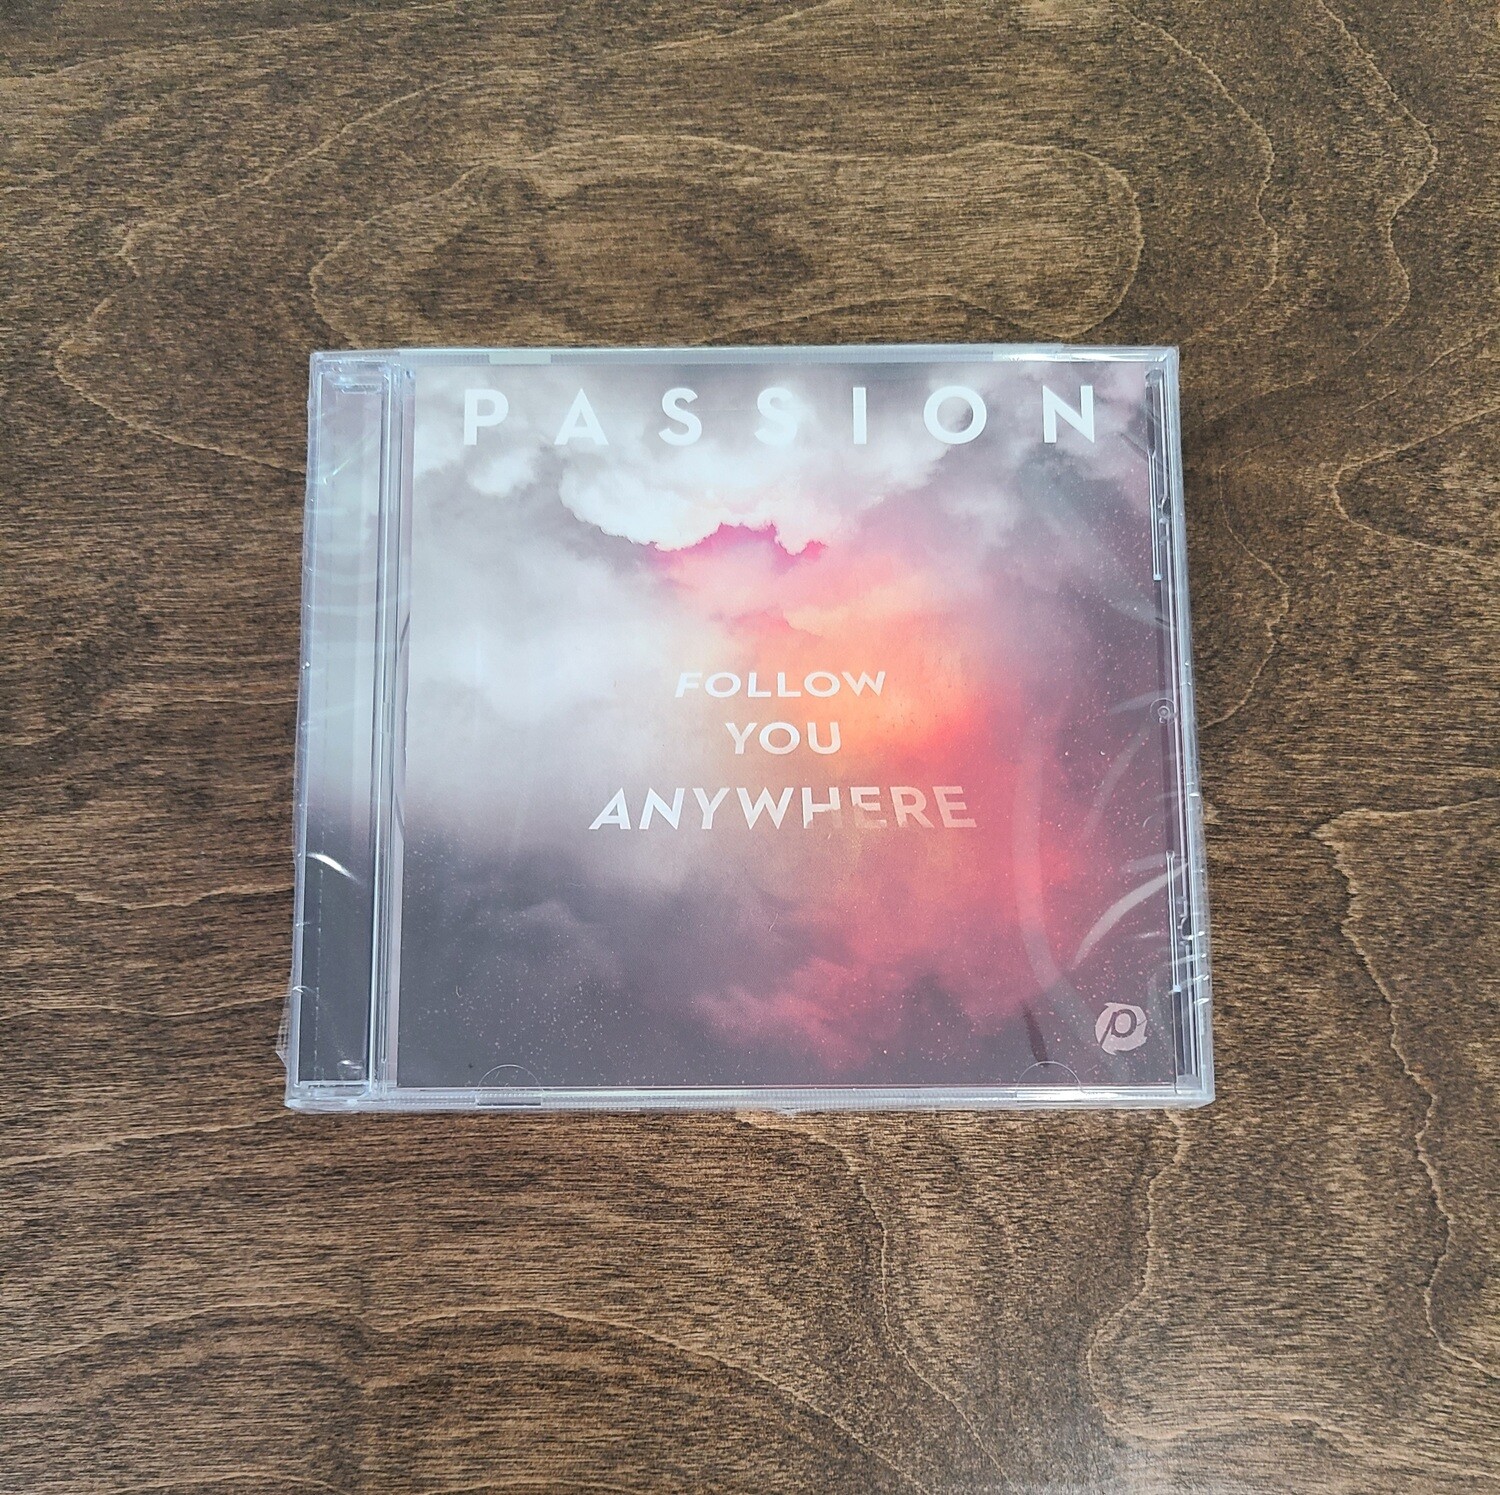 Follow You Anywhere by Passion CD